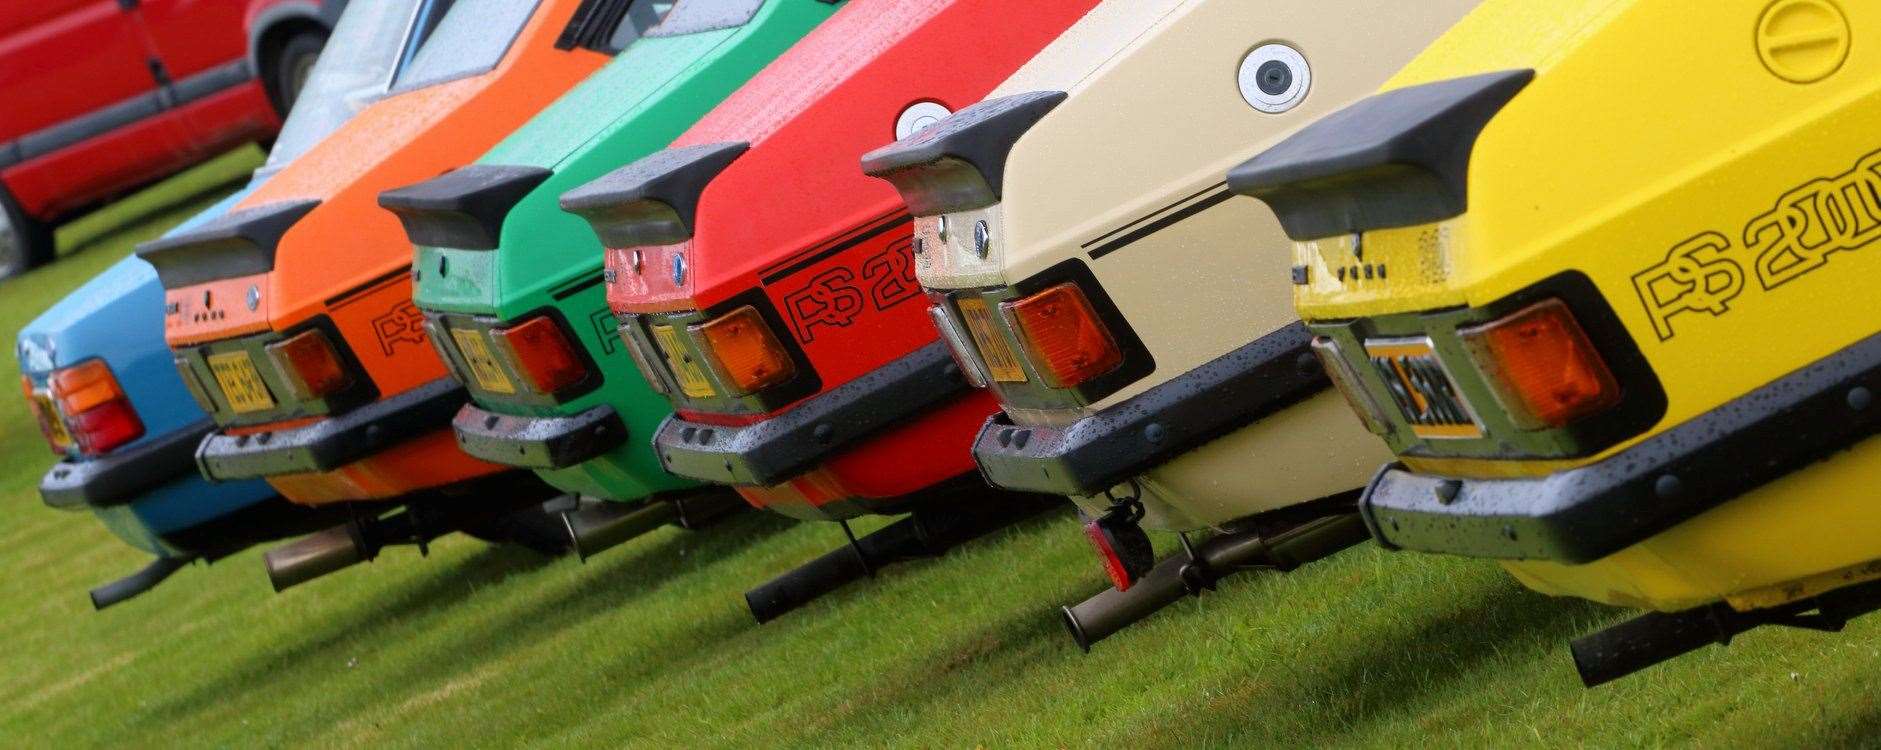 The TDVCC rally takes place in Turriff on Sunday at the Haughs.